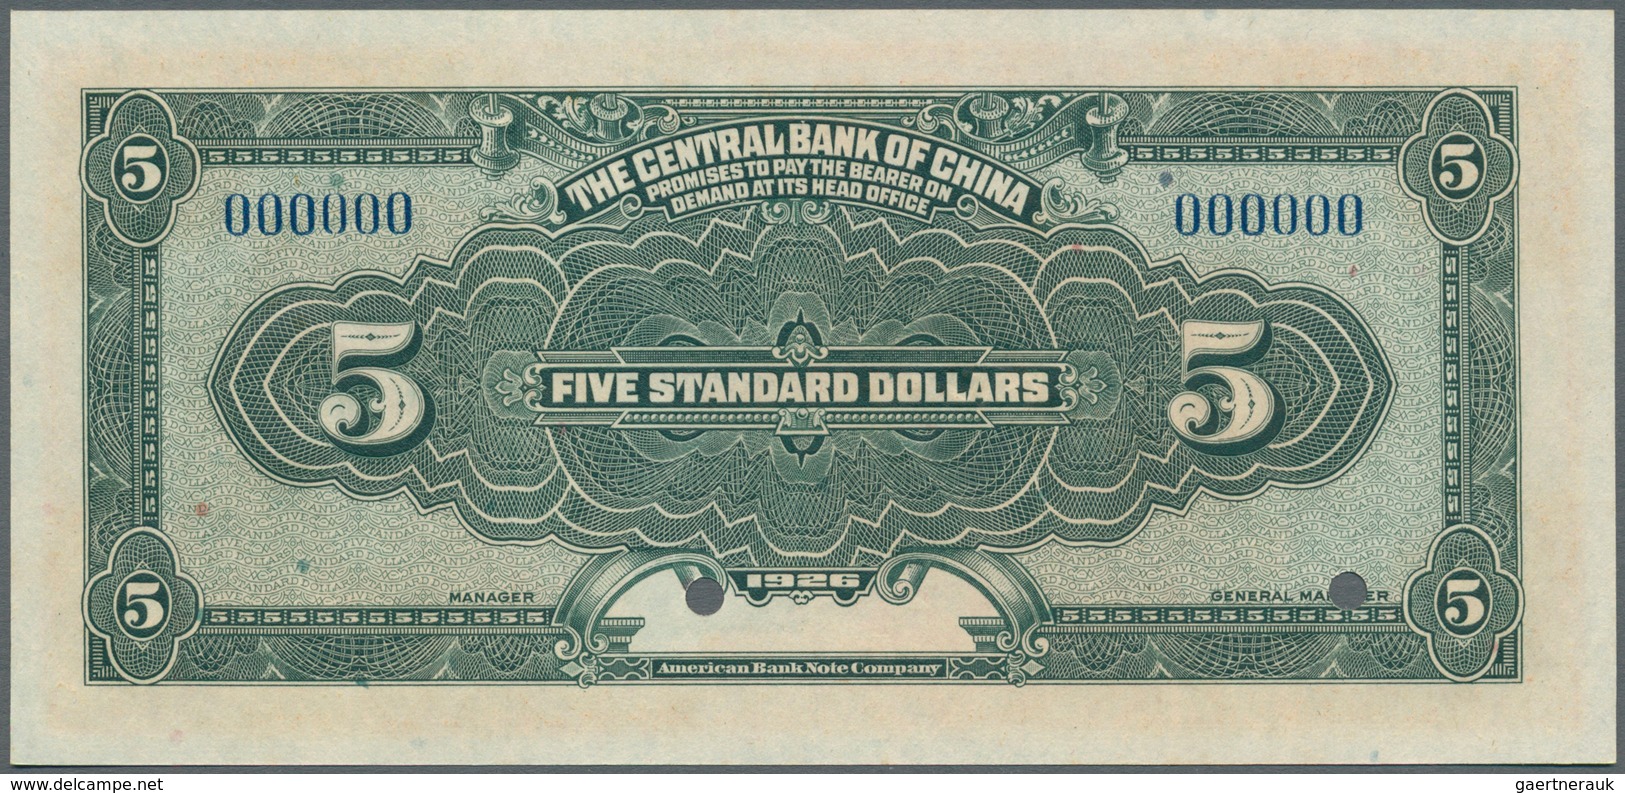 01291 China: The Central Bank Of China 5 Dollars 1926 Specimen P. 183s In Condition: UNC. - China